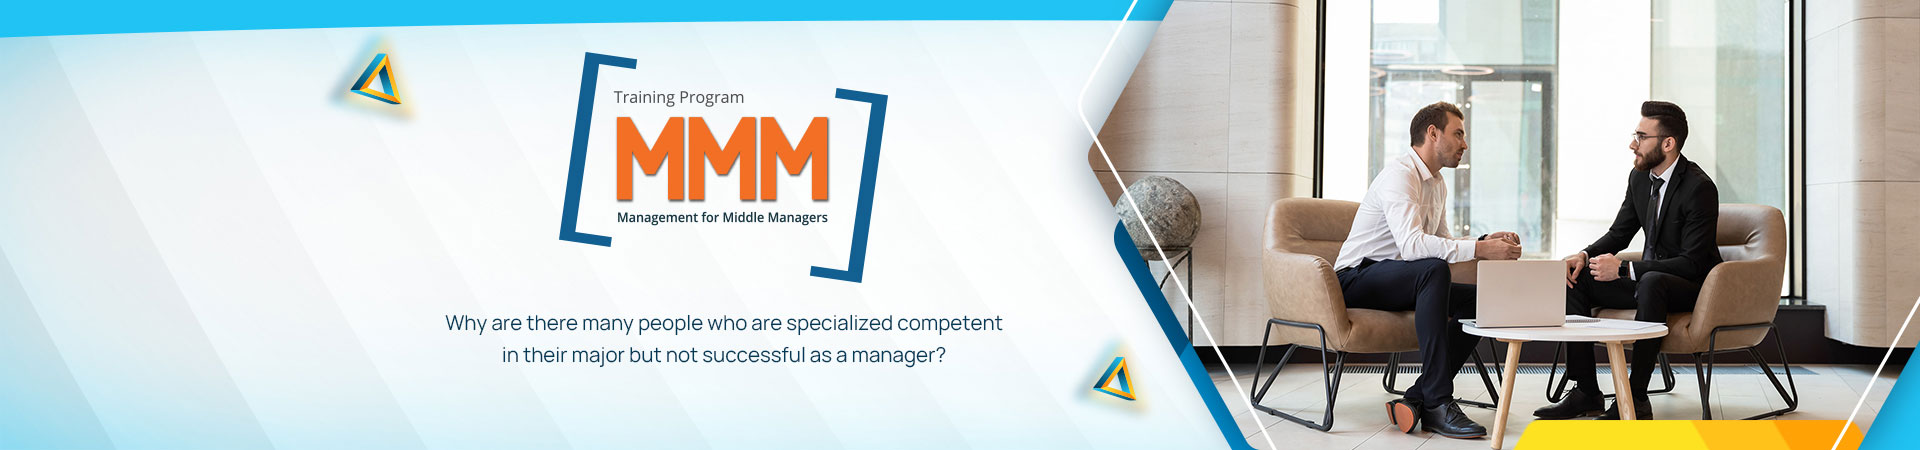 MMM - Management For Middle Managers